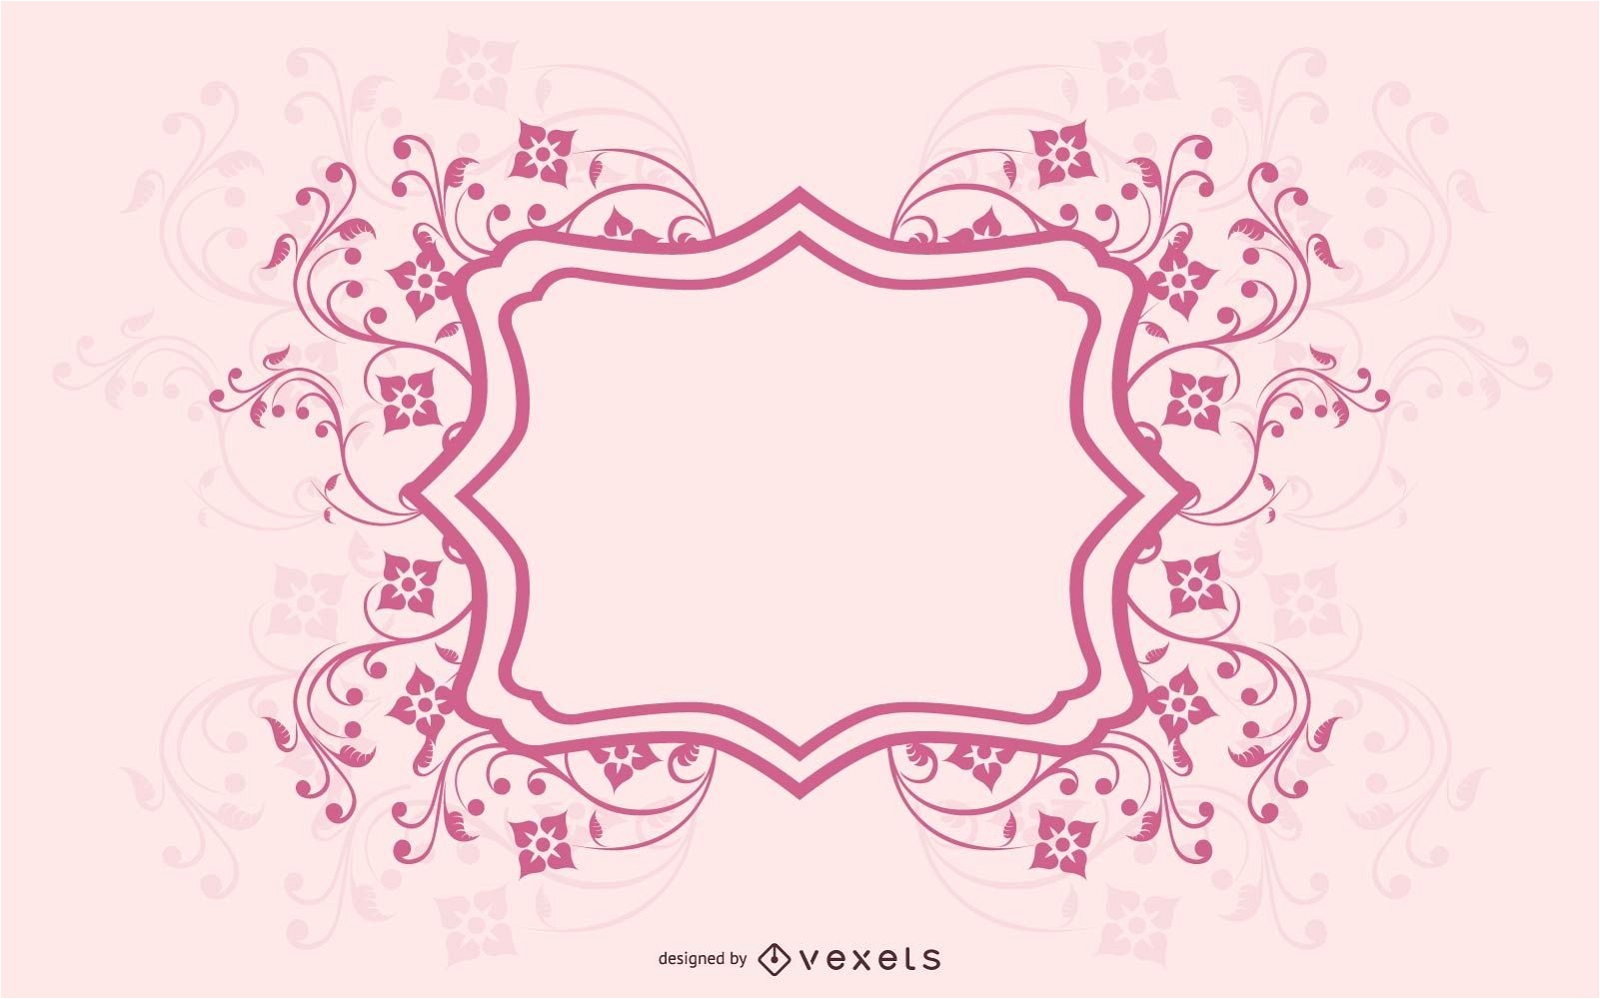 Template Invitation Card with Soft Spiral Lines